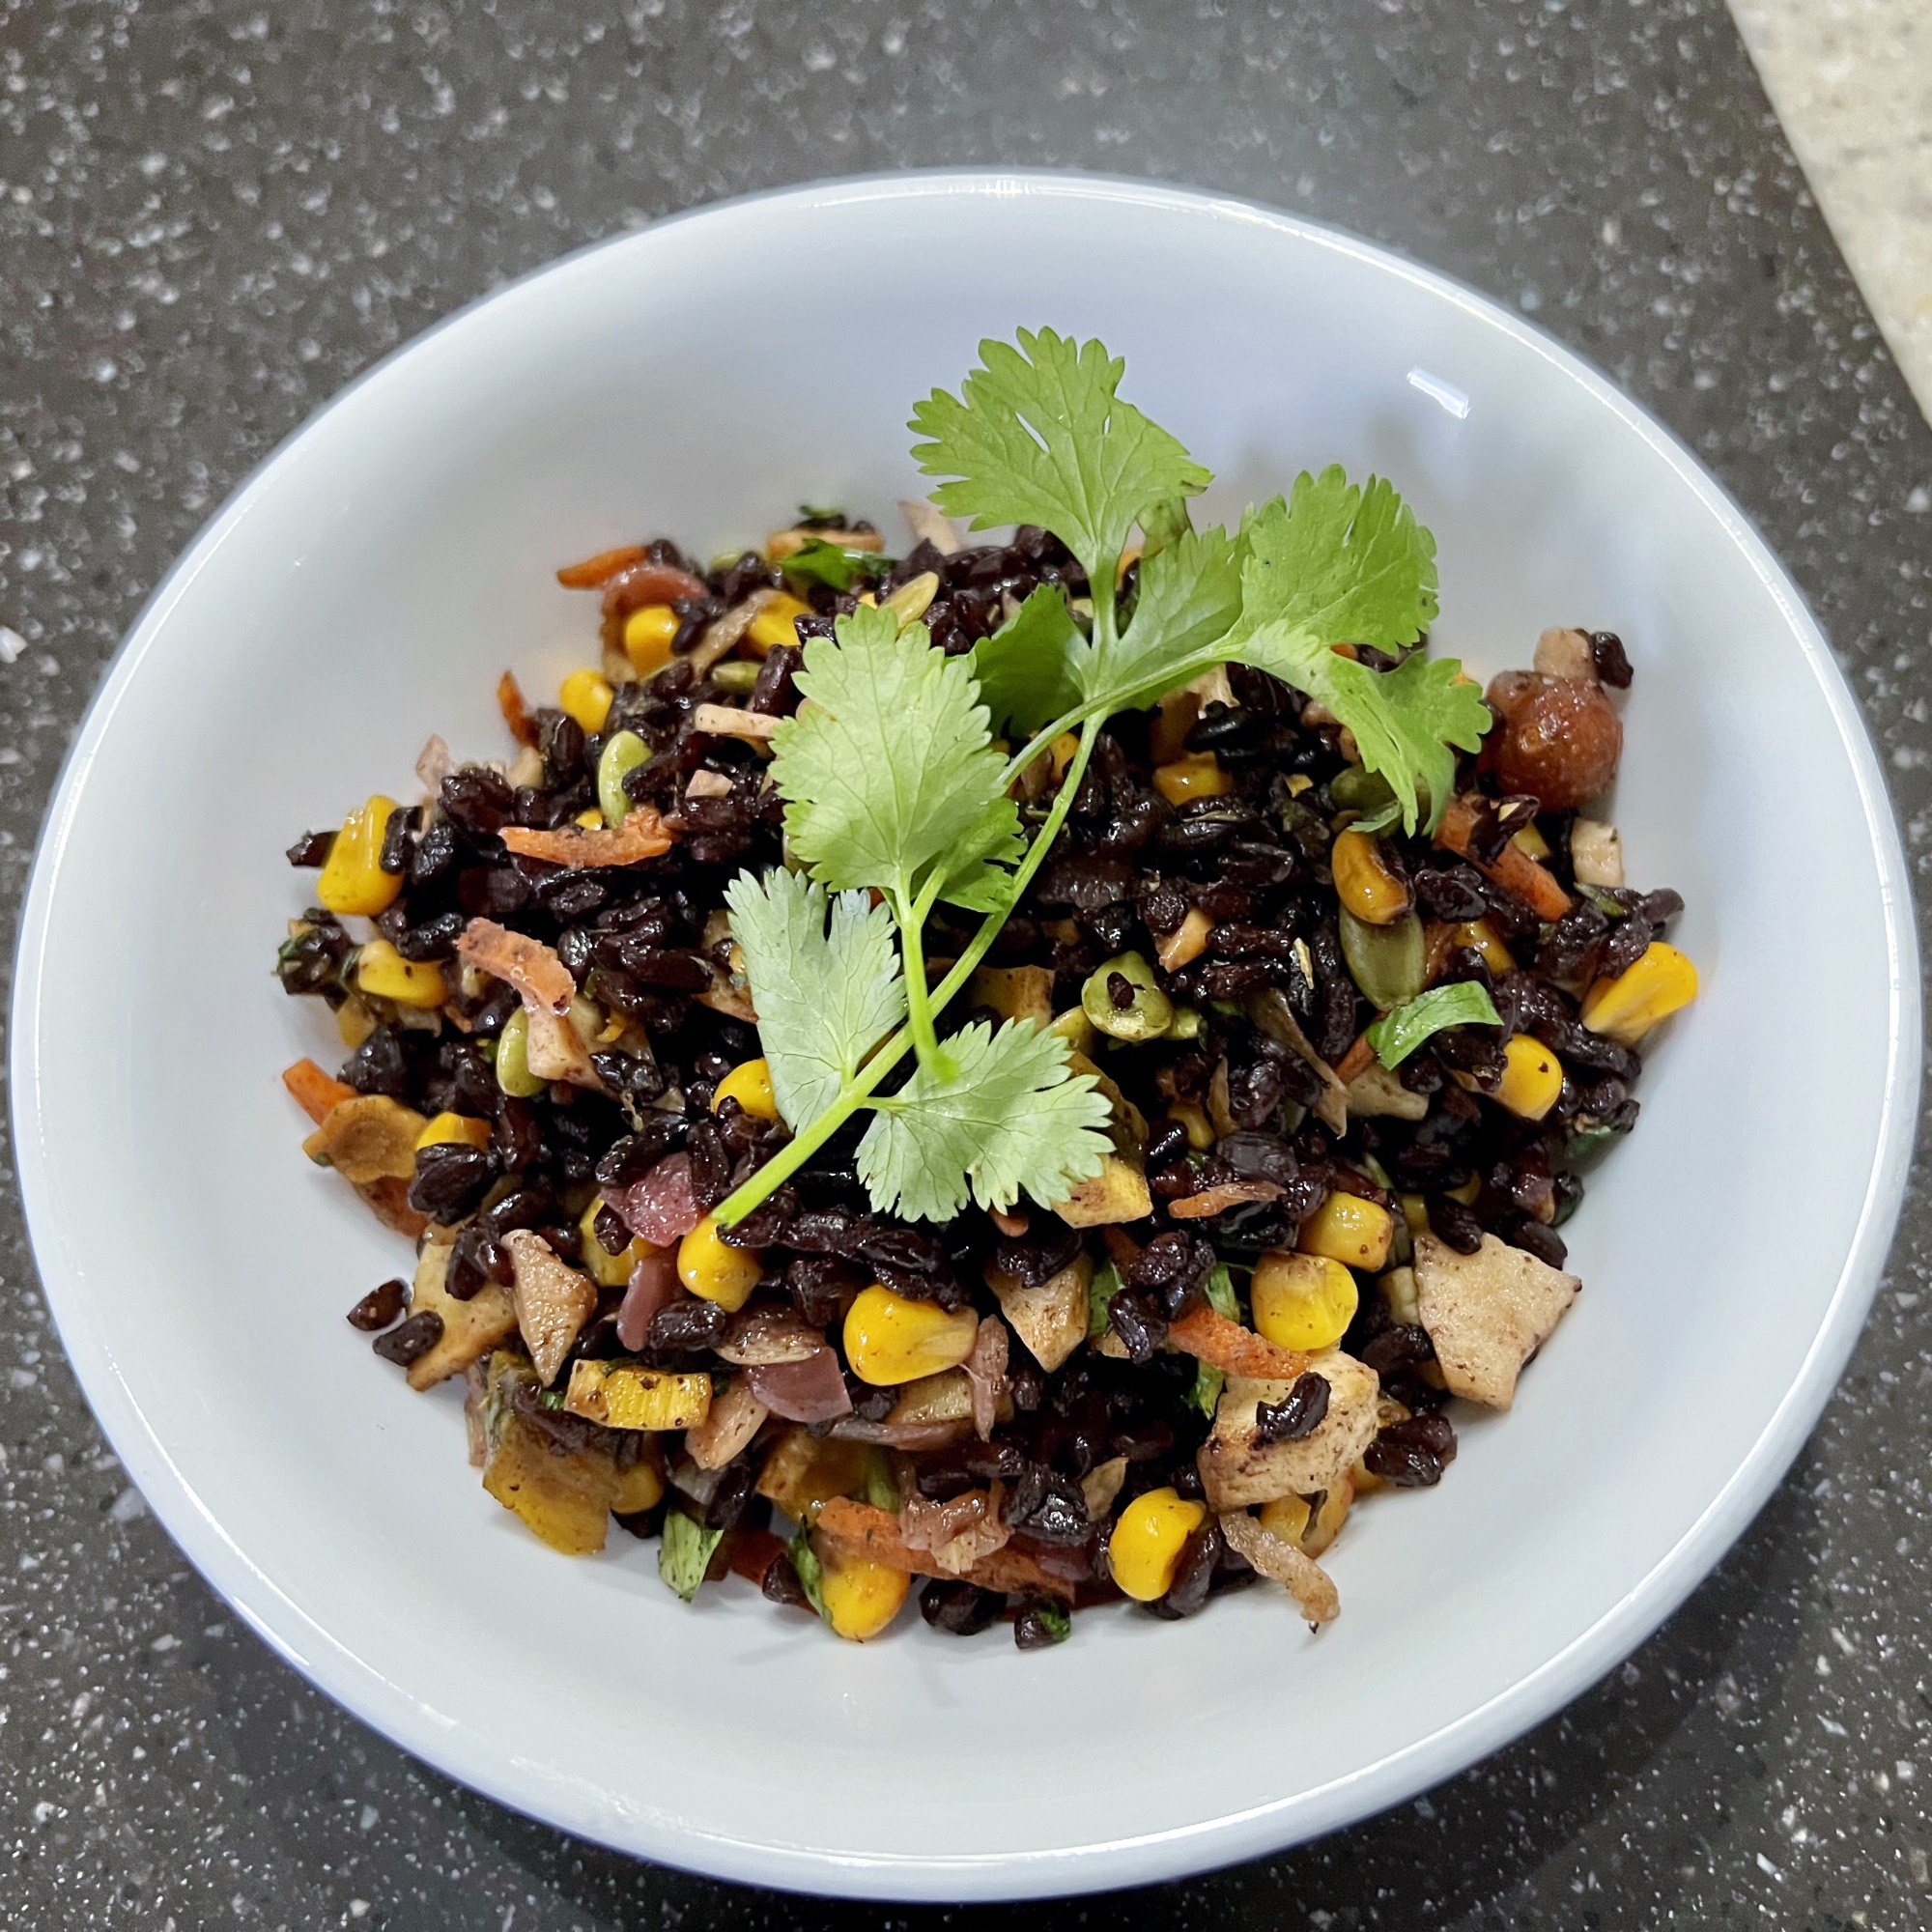 autumn black rice salad in a white bowl garnished with a cilantro sprig.